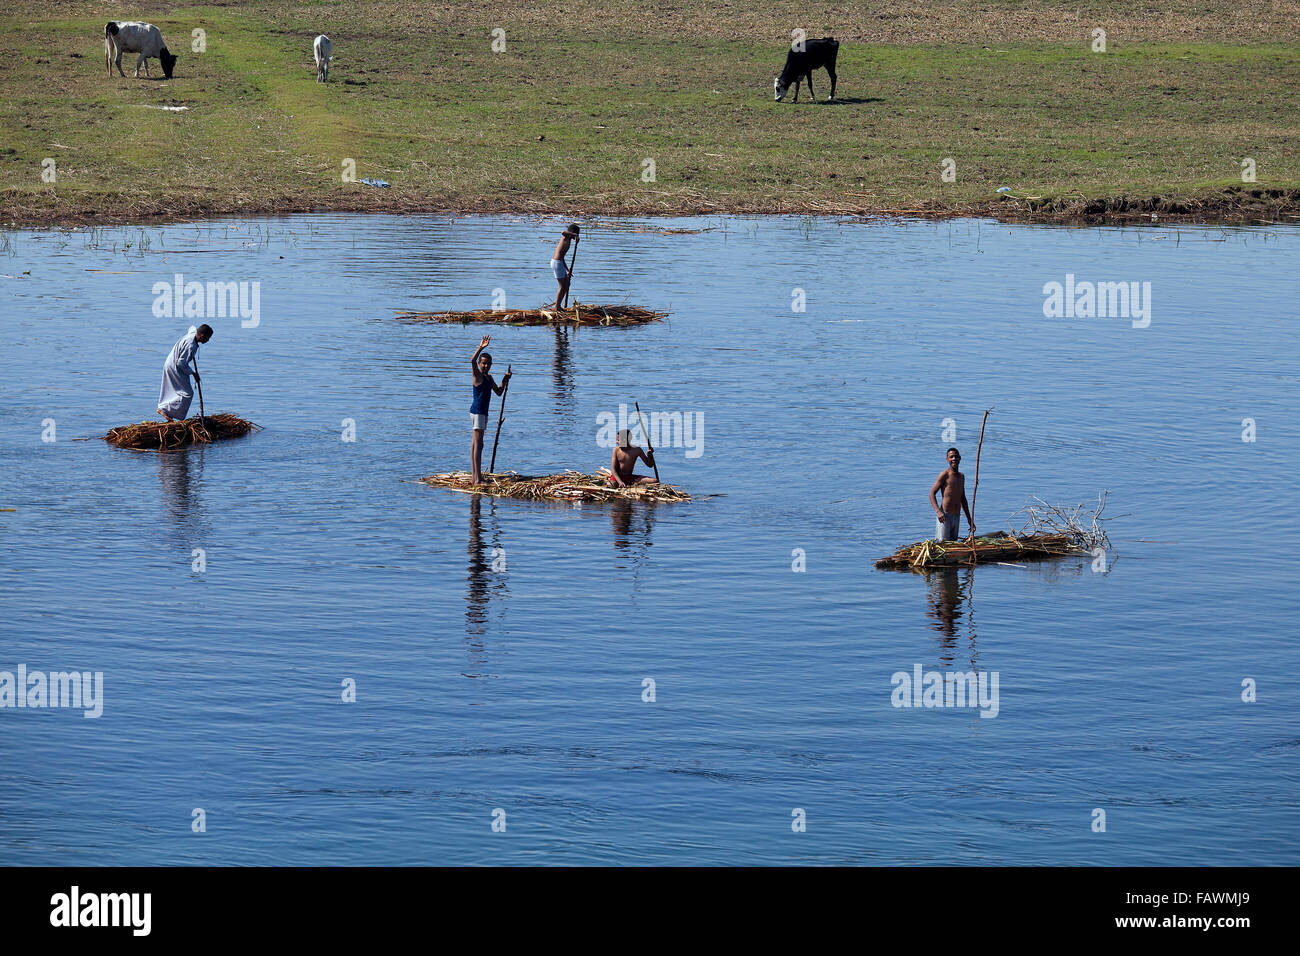 Egyptian children on simple papyrus rafts on the river Nile near Luxor, Egypt Stock Photo